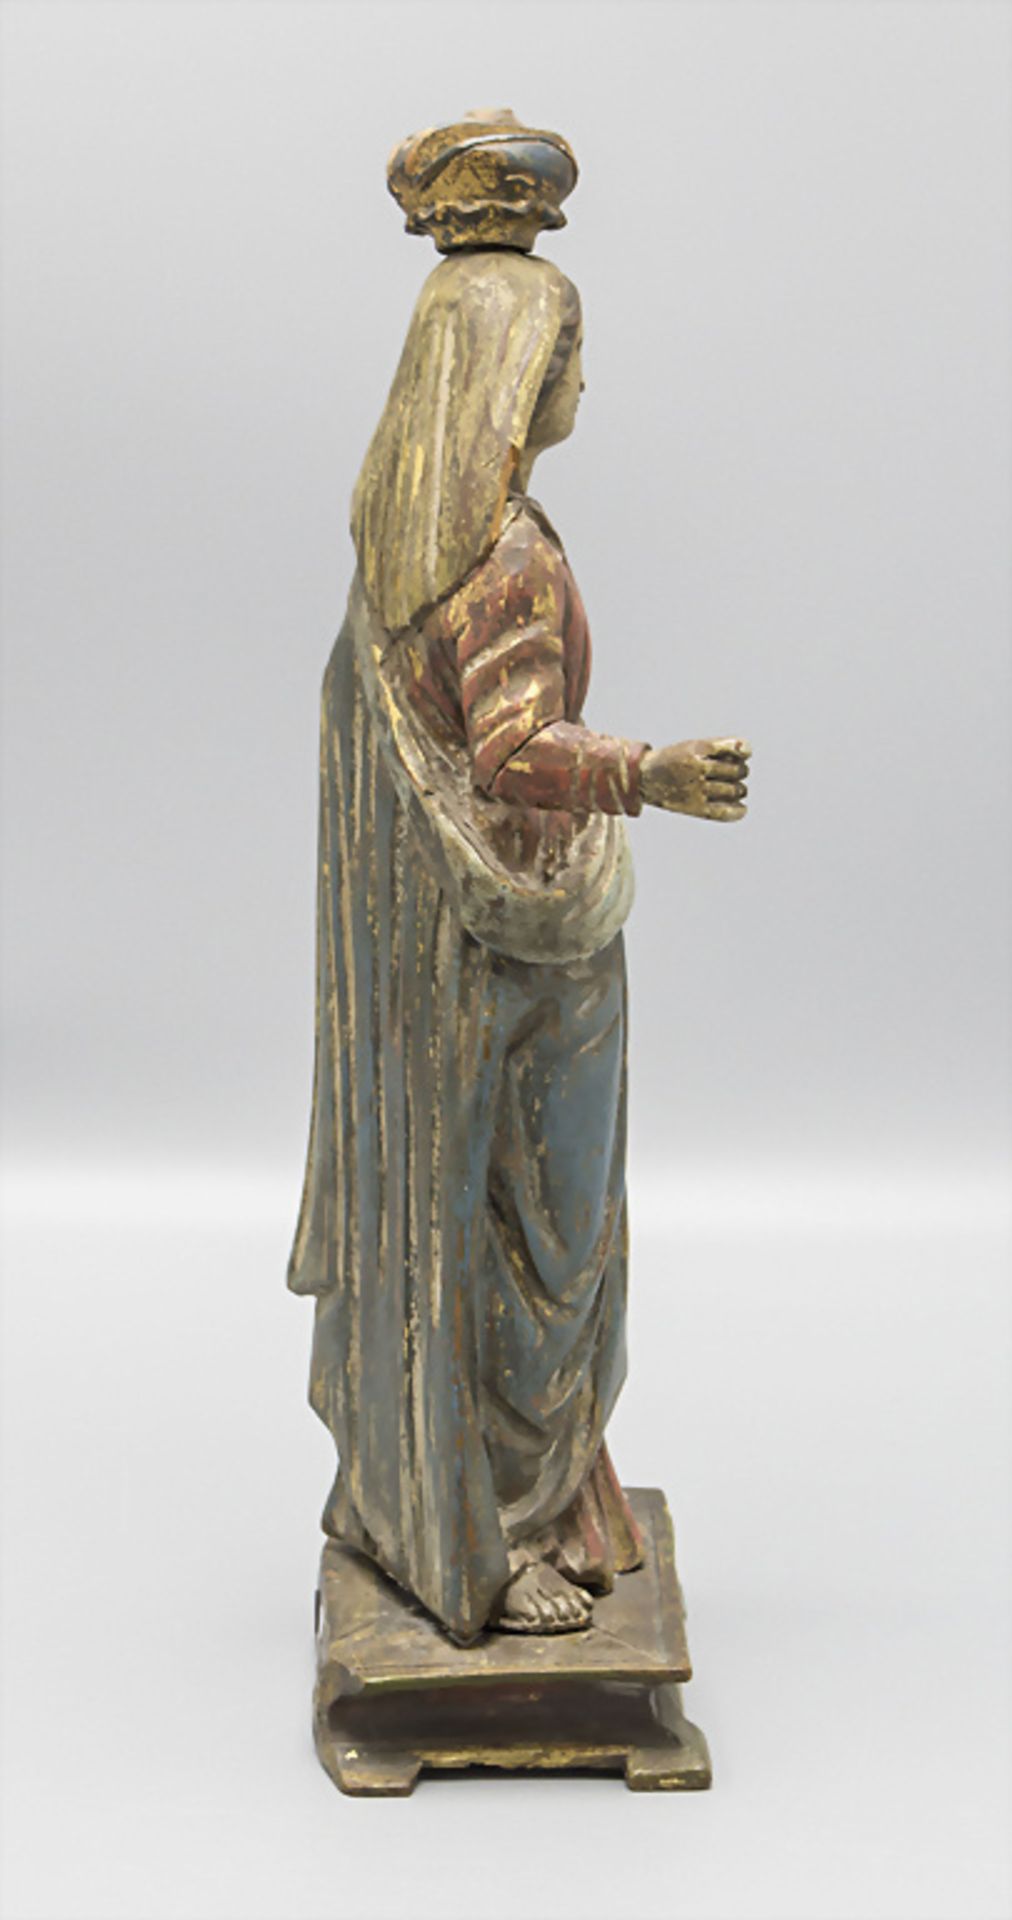 Holzskulptur einer Madonna mit Kind / A wooden sculpture of mother Mary with child, 18. Jh. - Image 3 of 6